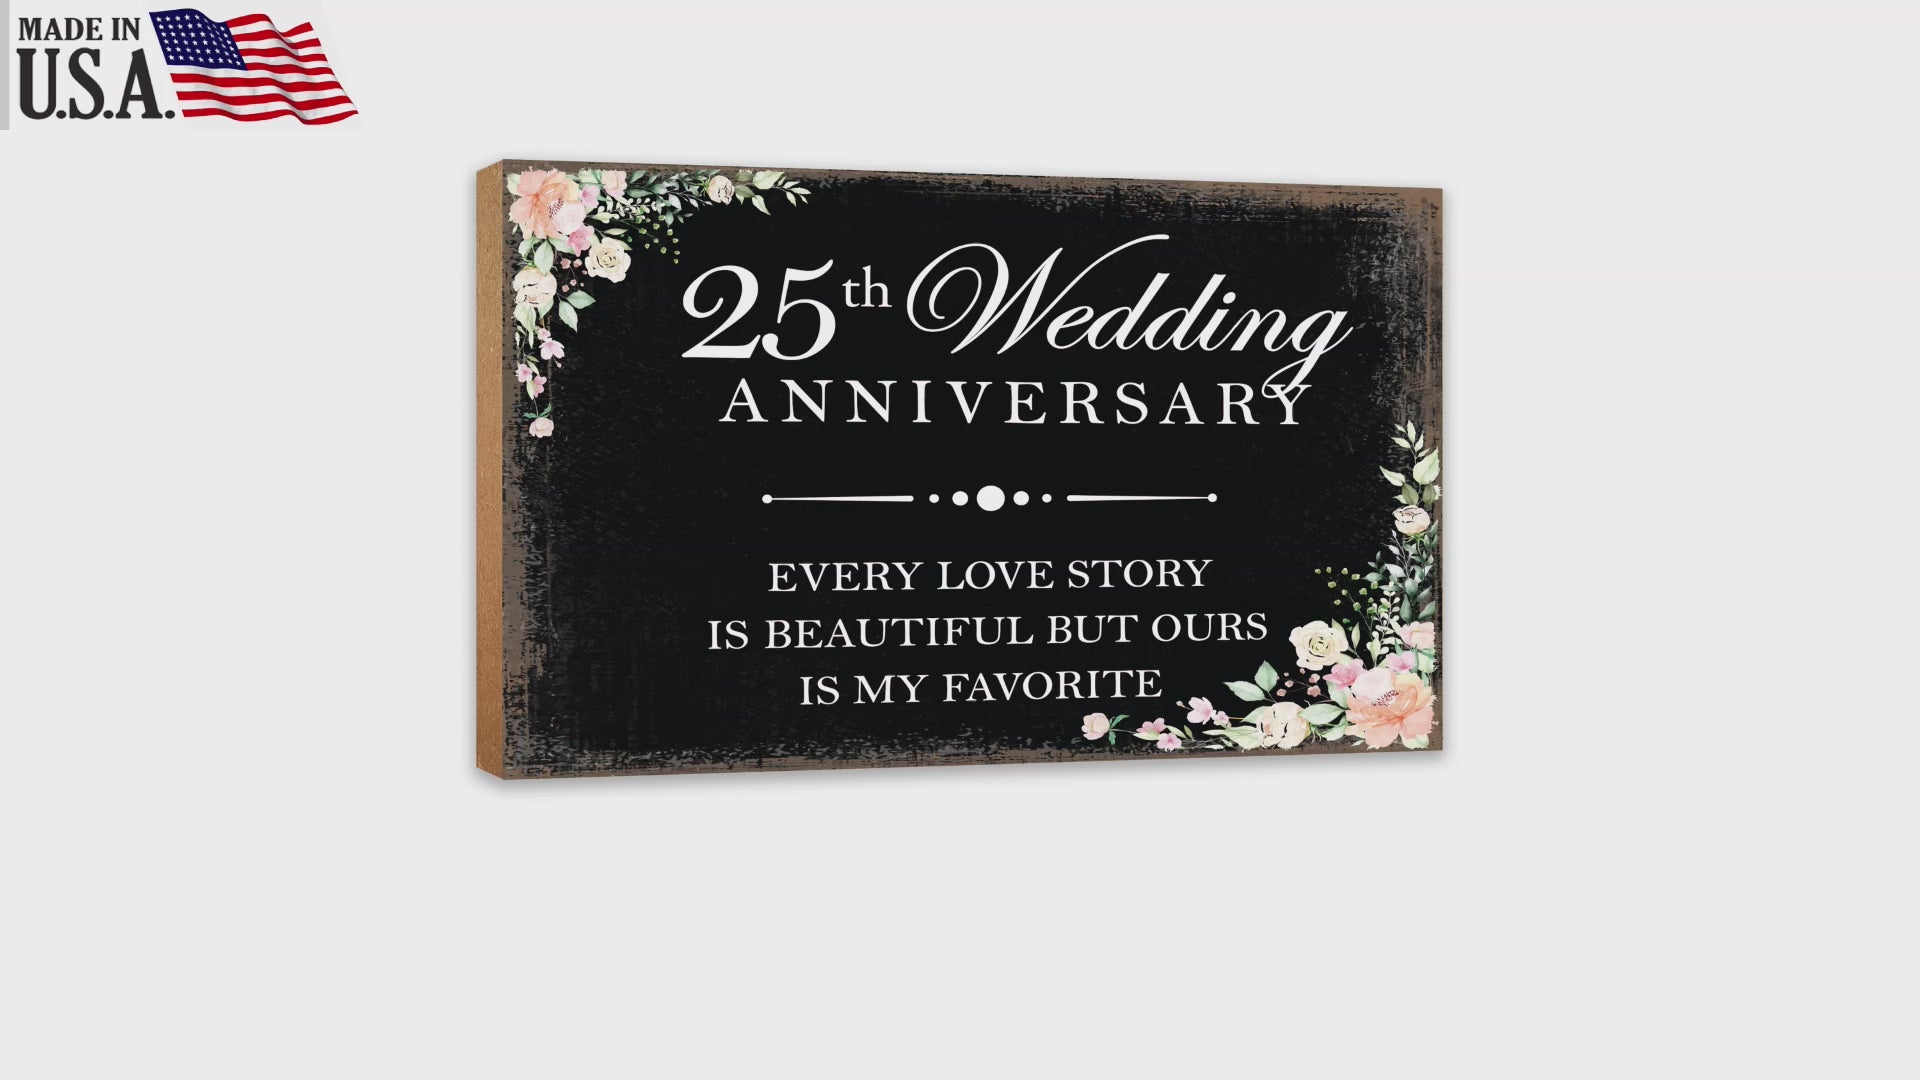 25th Wedding Anniversary Unique Shelf Decor and Tabletop Signs Gifts for Couples - Every Love Story